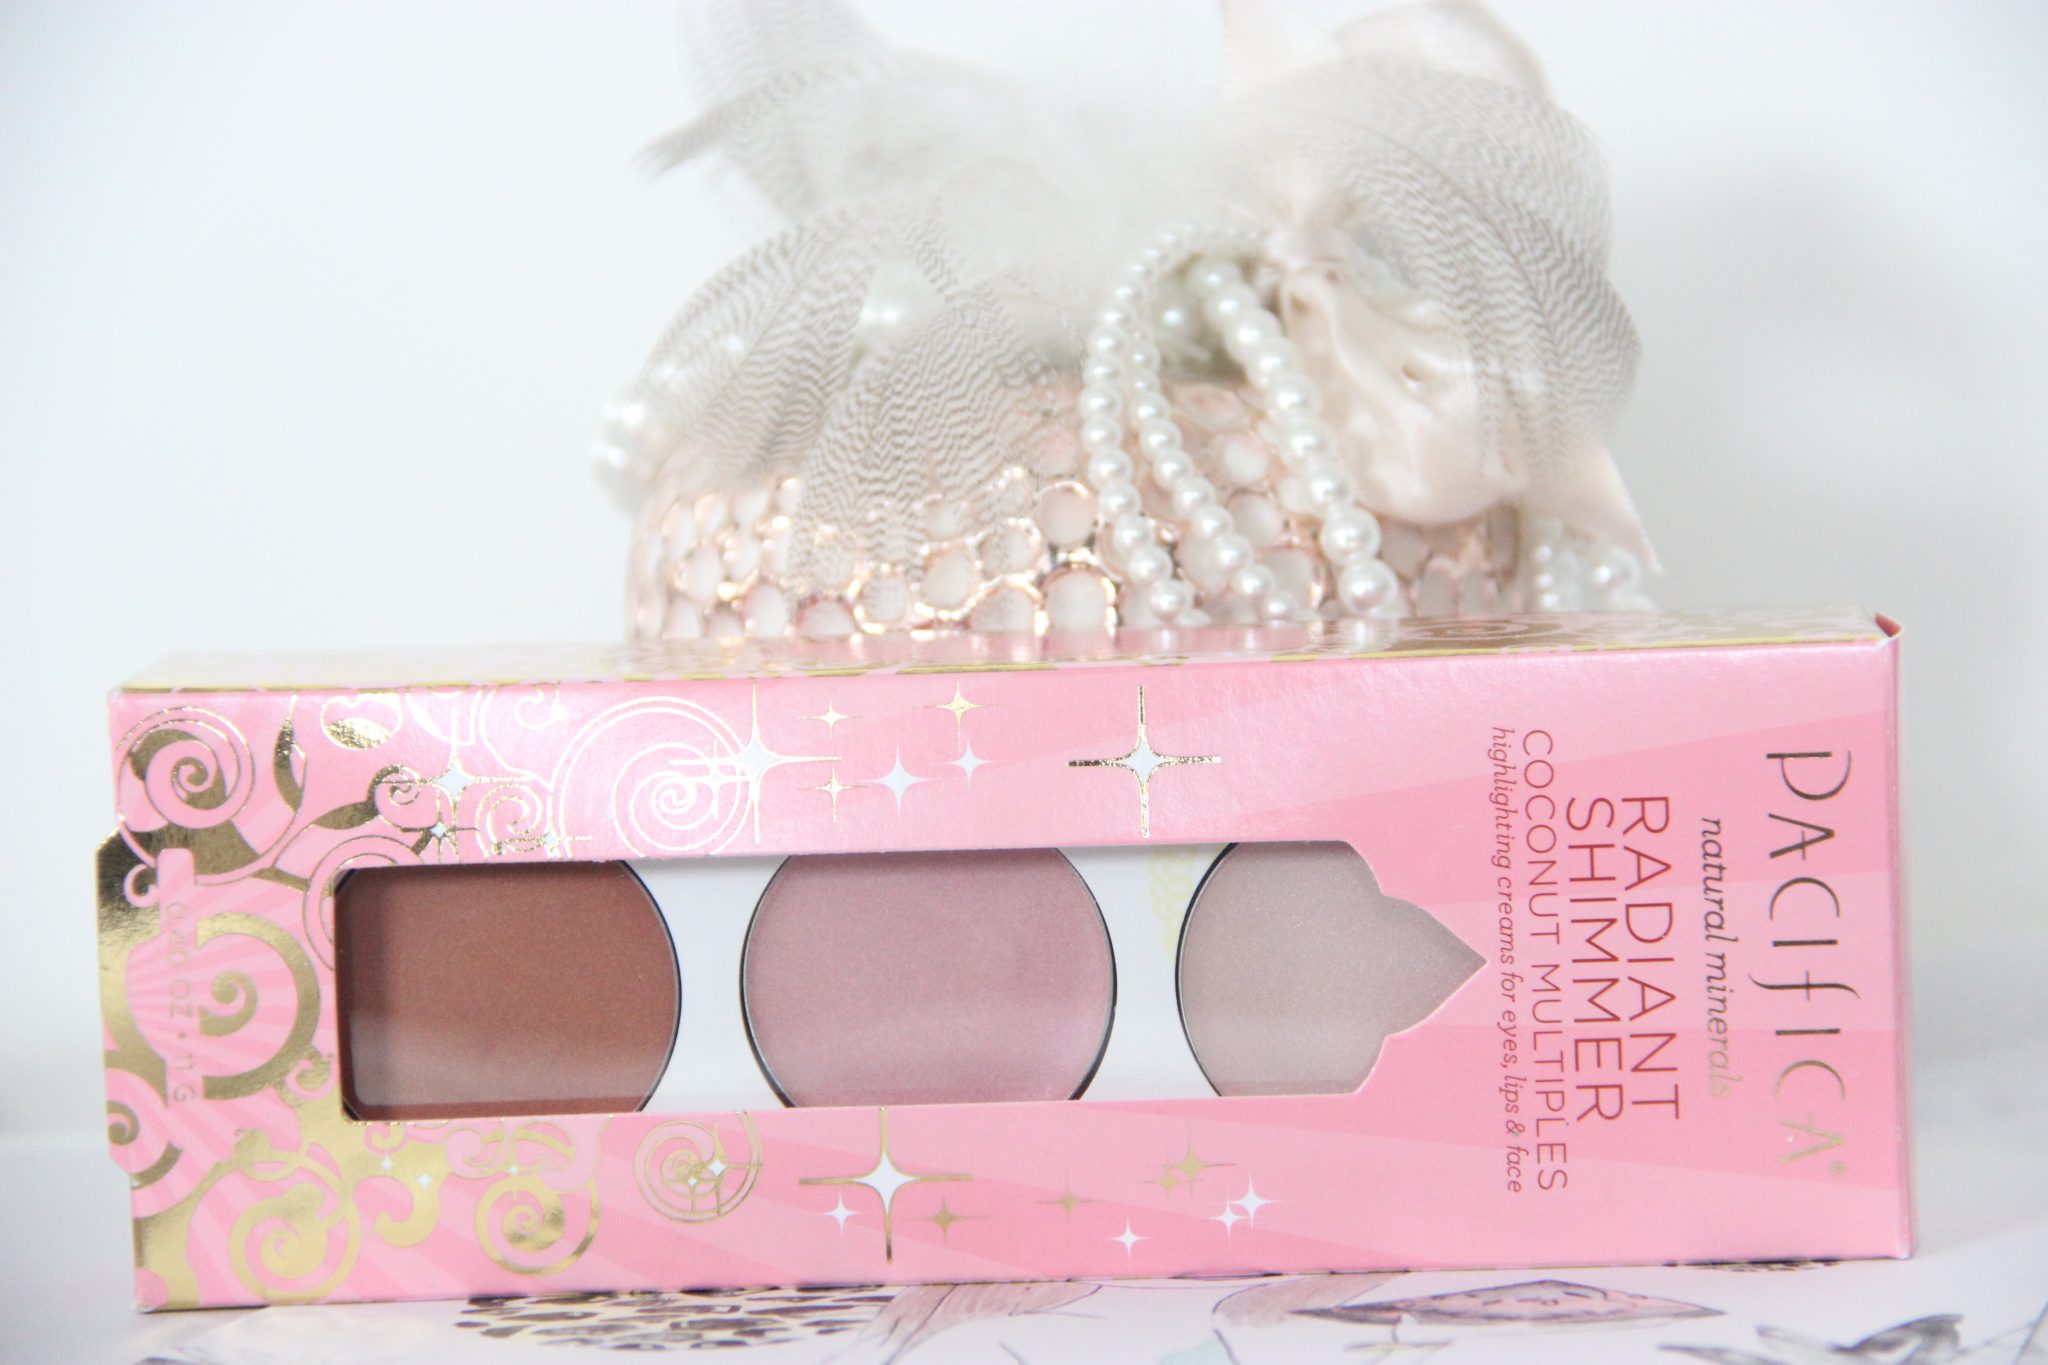 Pacifica Radiant Shimmer Coconut Multiples